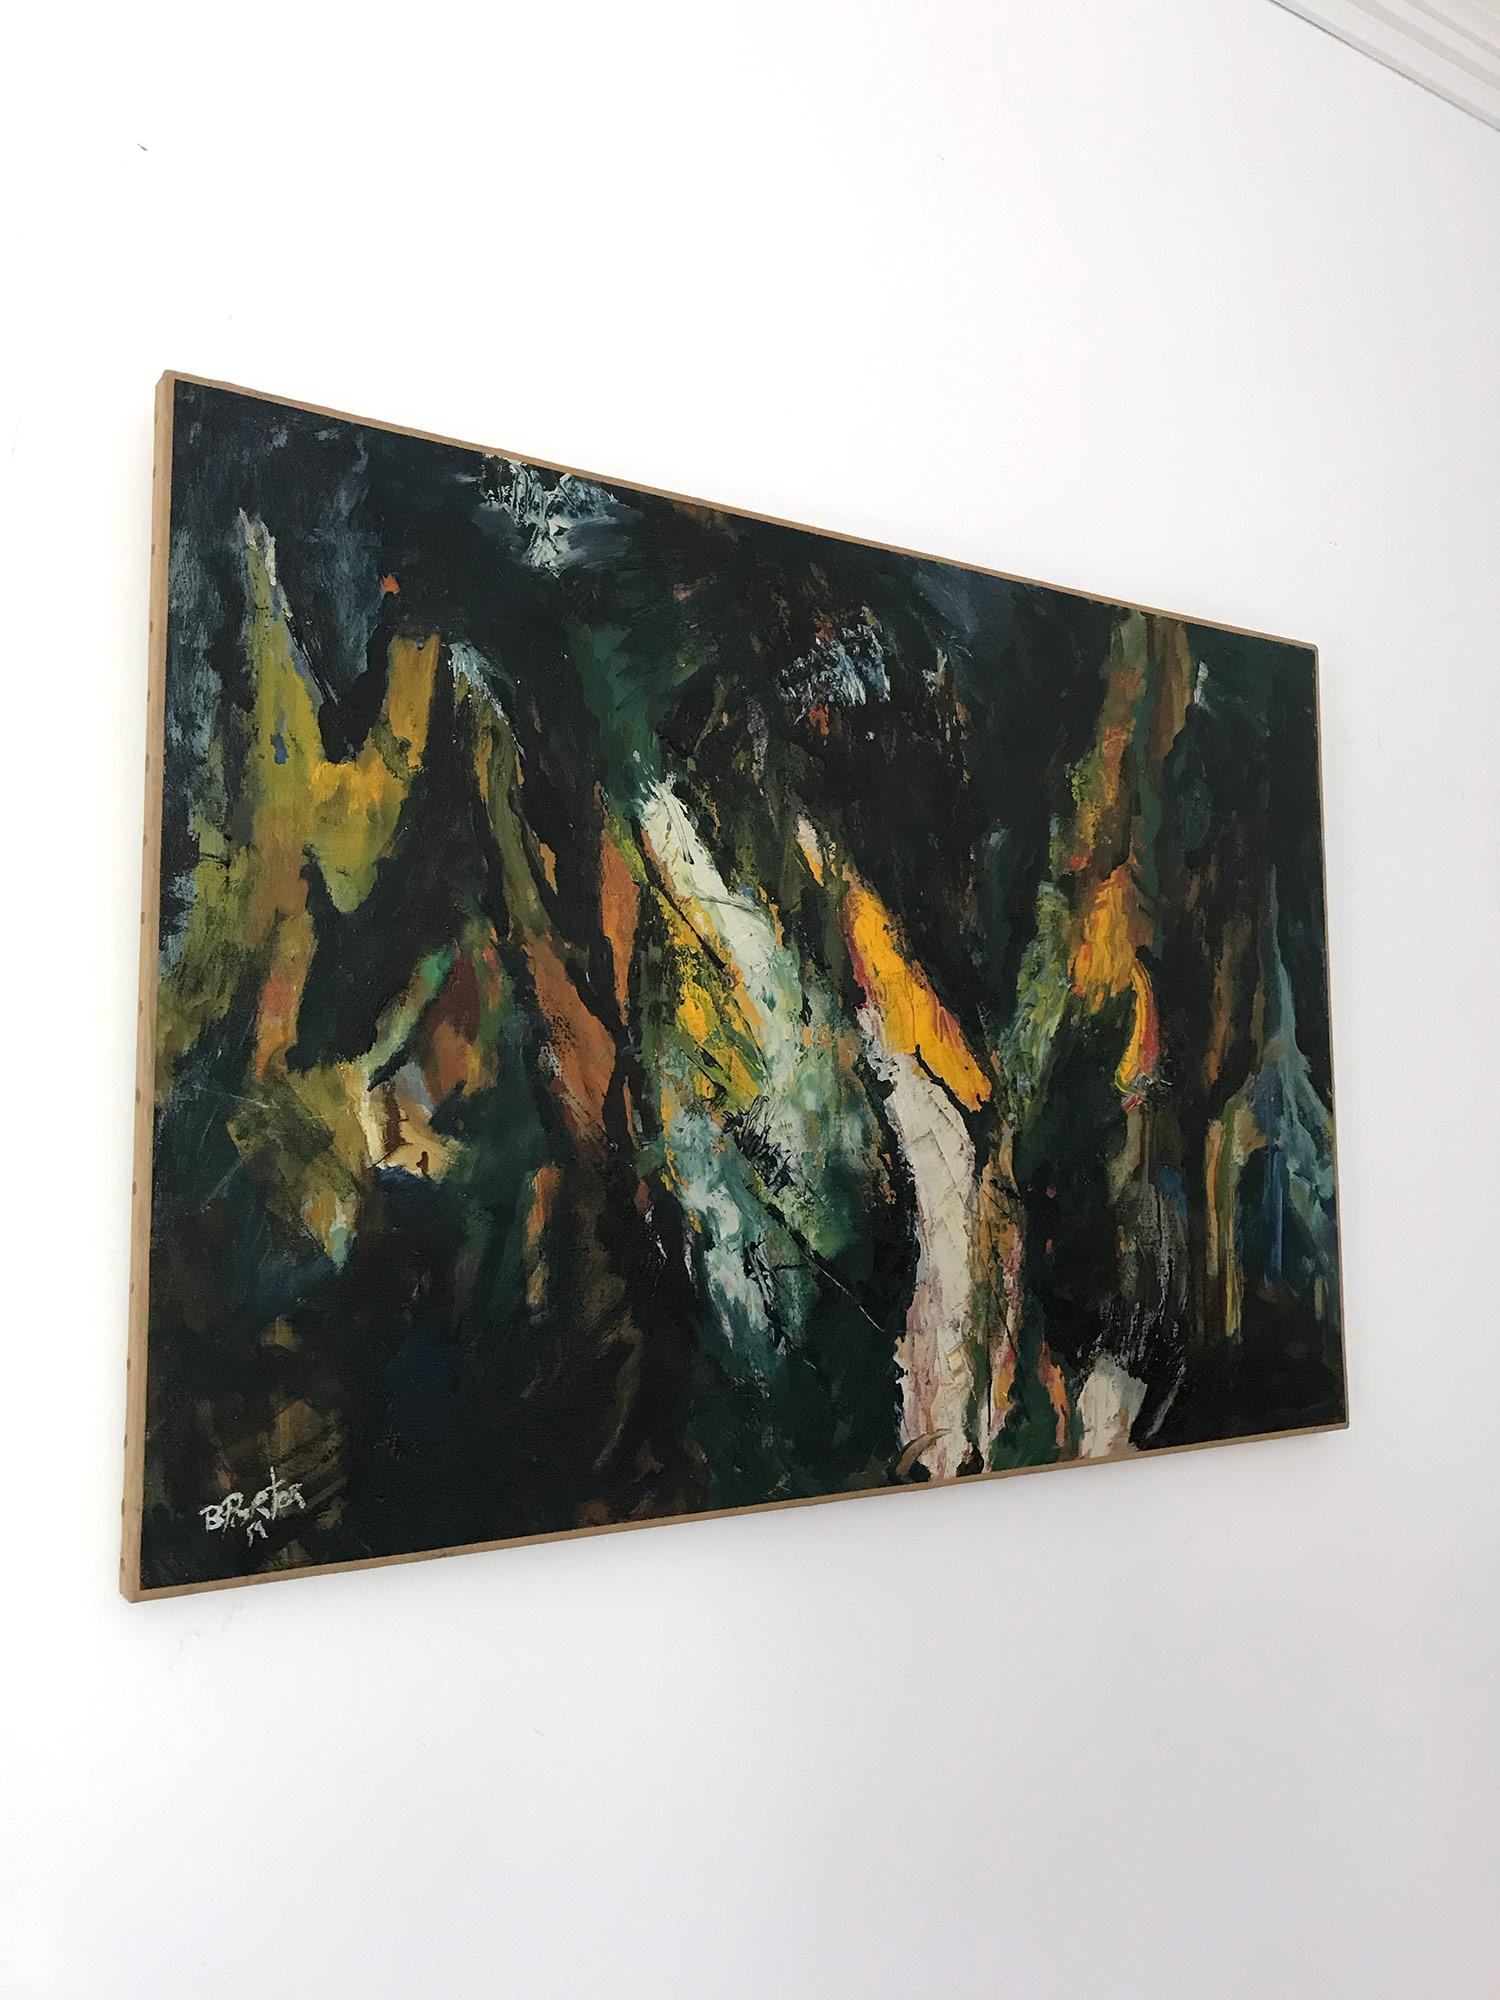 Mid 20th Century Abstract Expressionist Oil Painting on Canvas  - Black Abstract Painting by B Porter